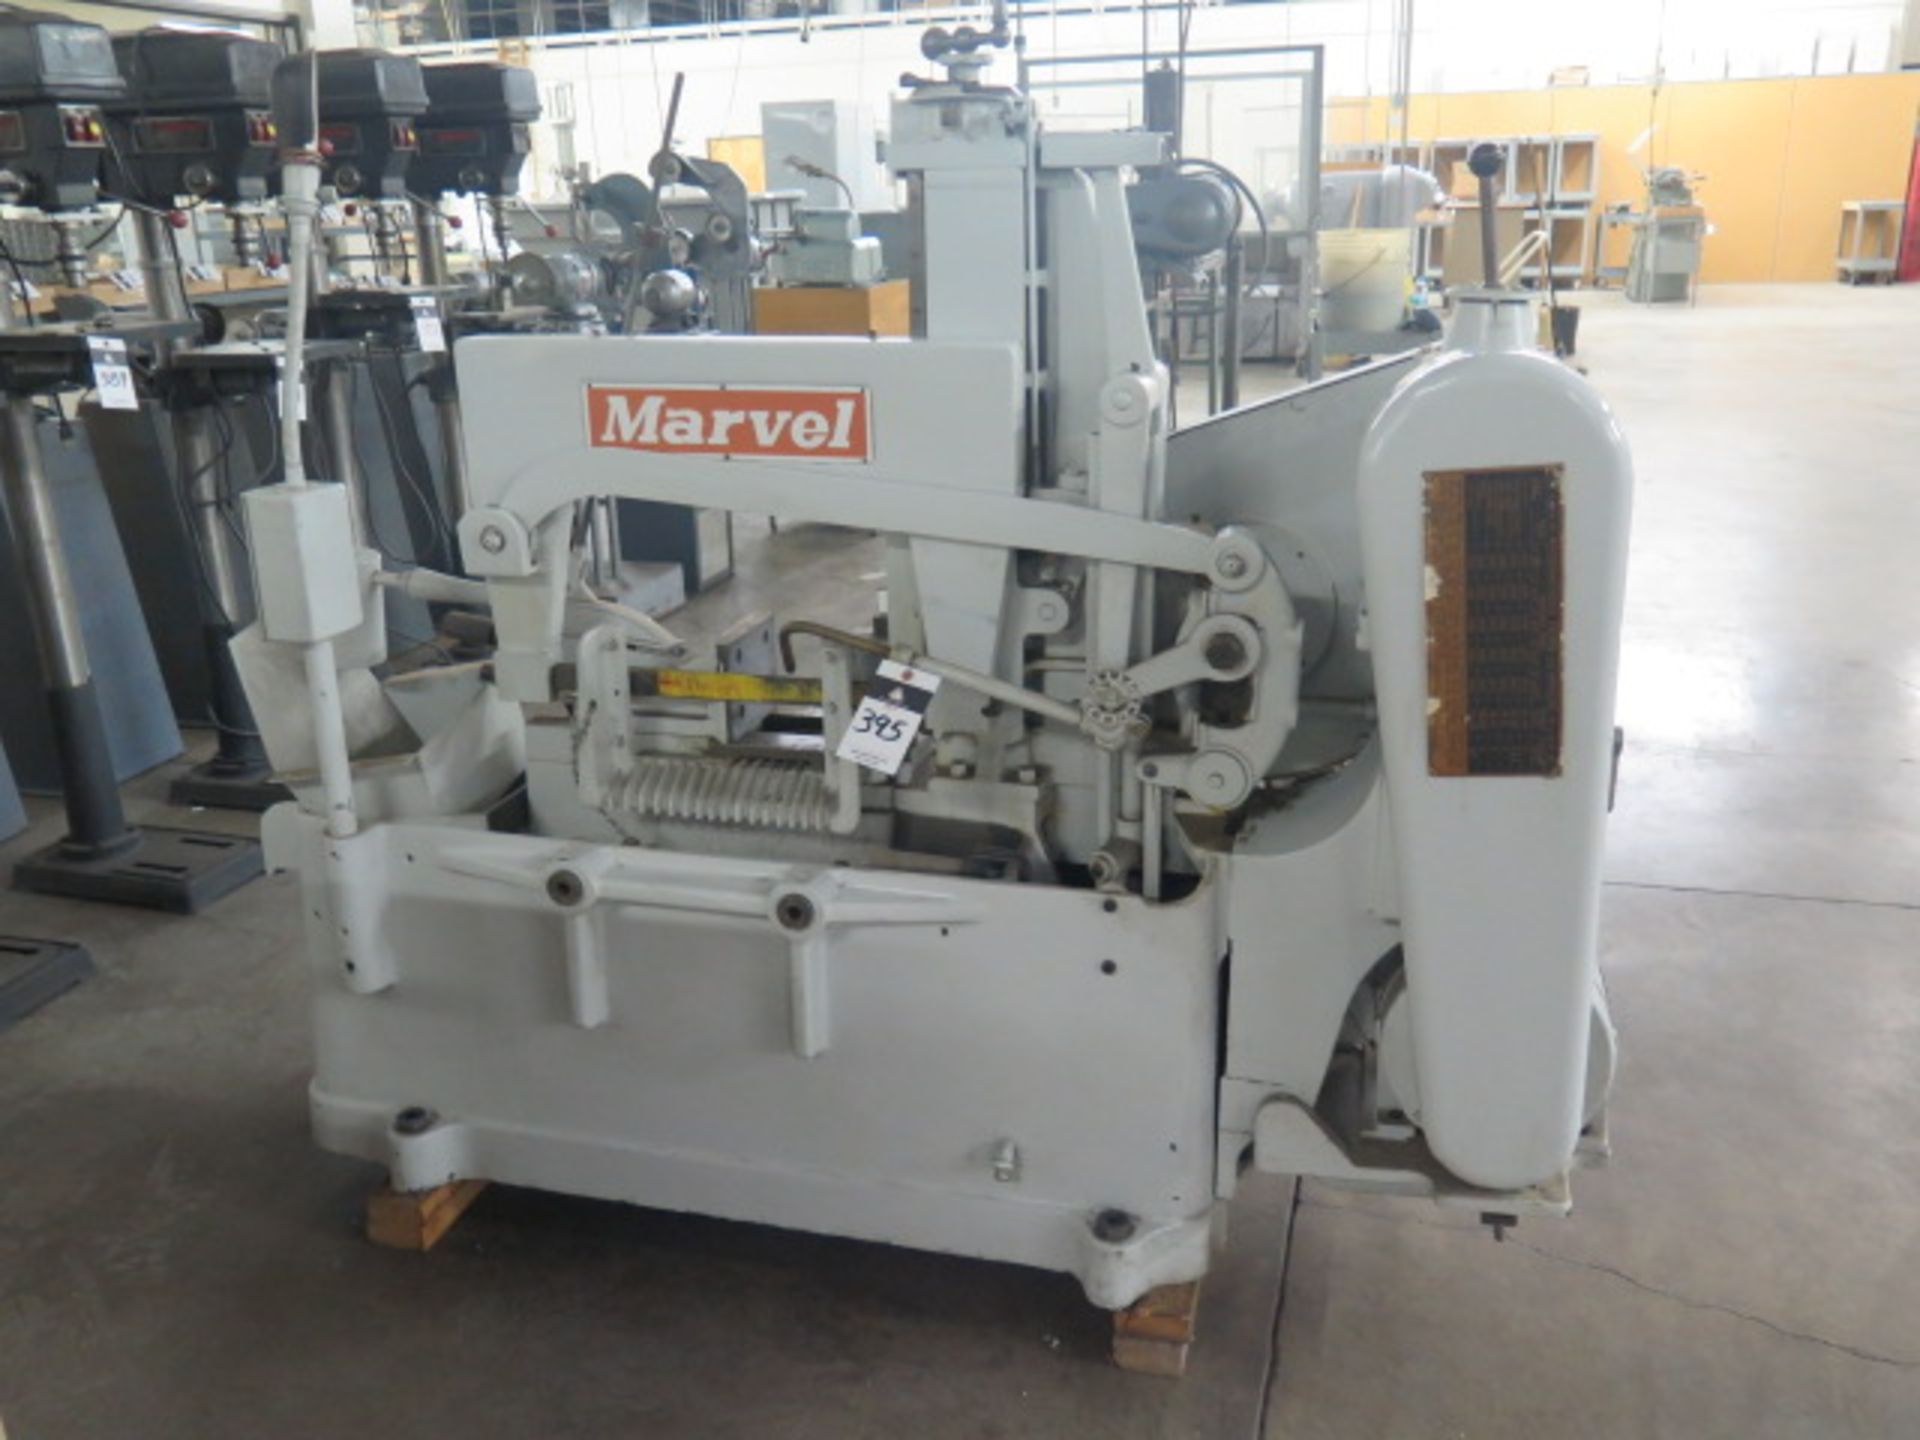 Marvel Series 9A mdl. 9A4/E9 Automatic Reciprocating Saw